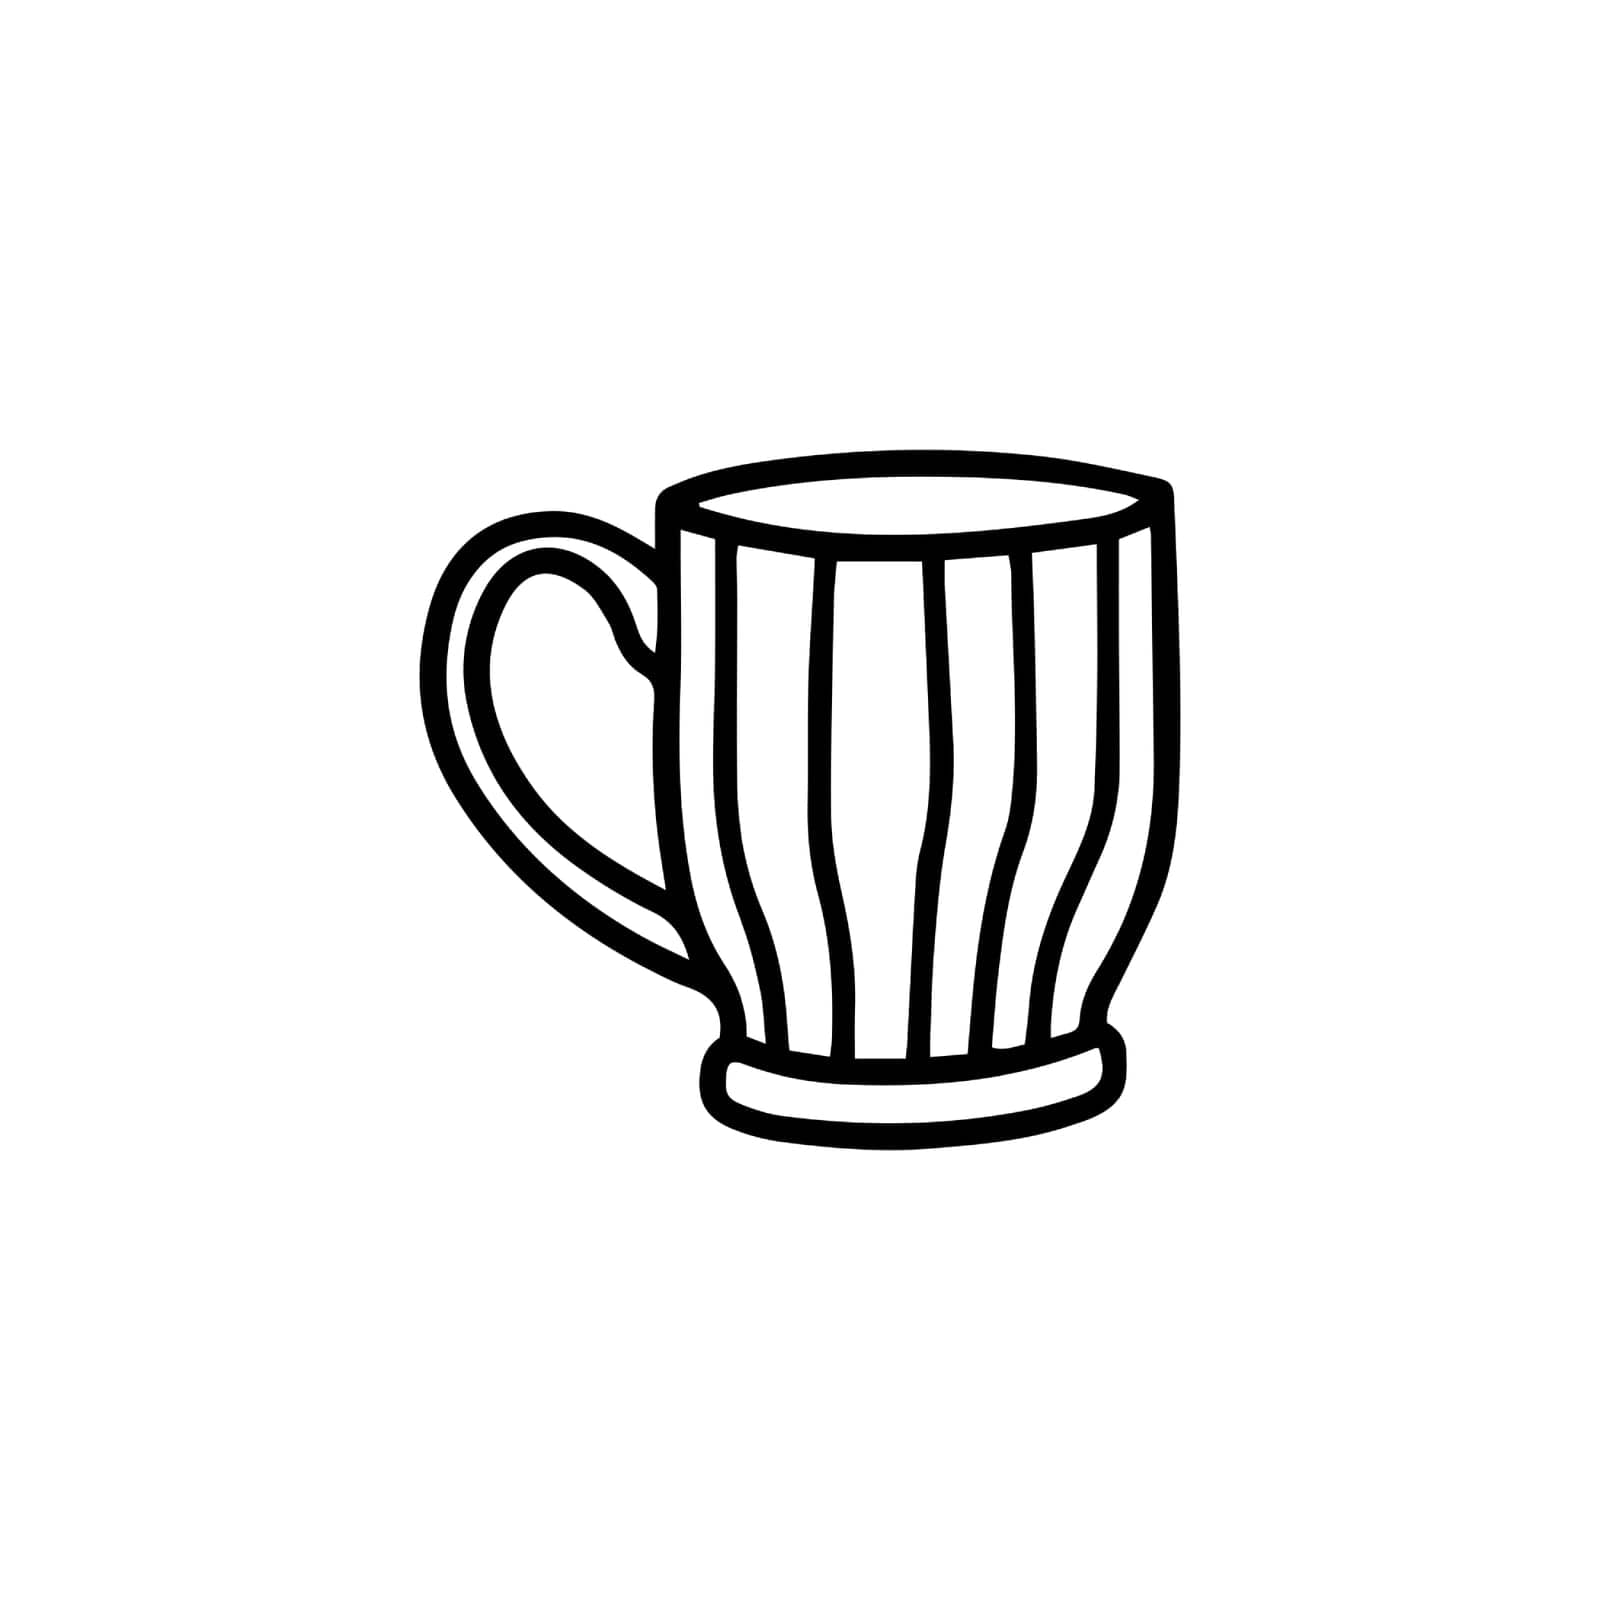 A mug with a striped pattern. Doodle style by Dustick